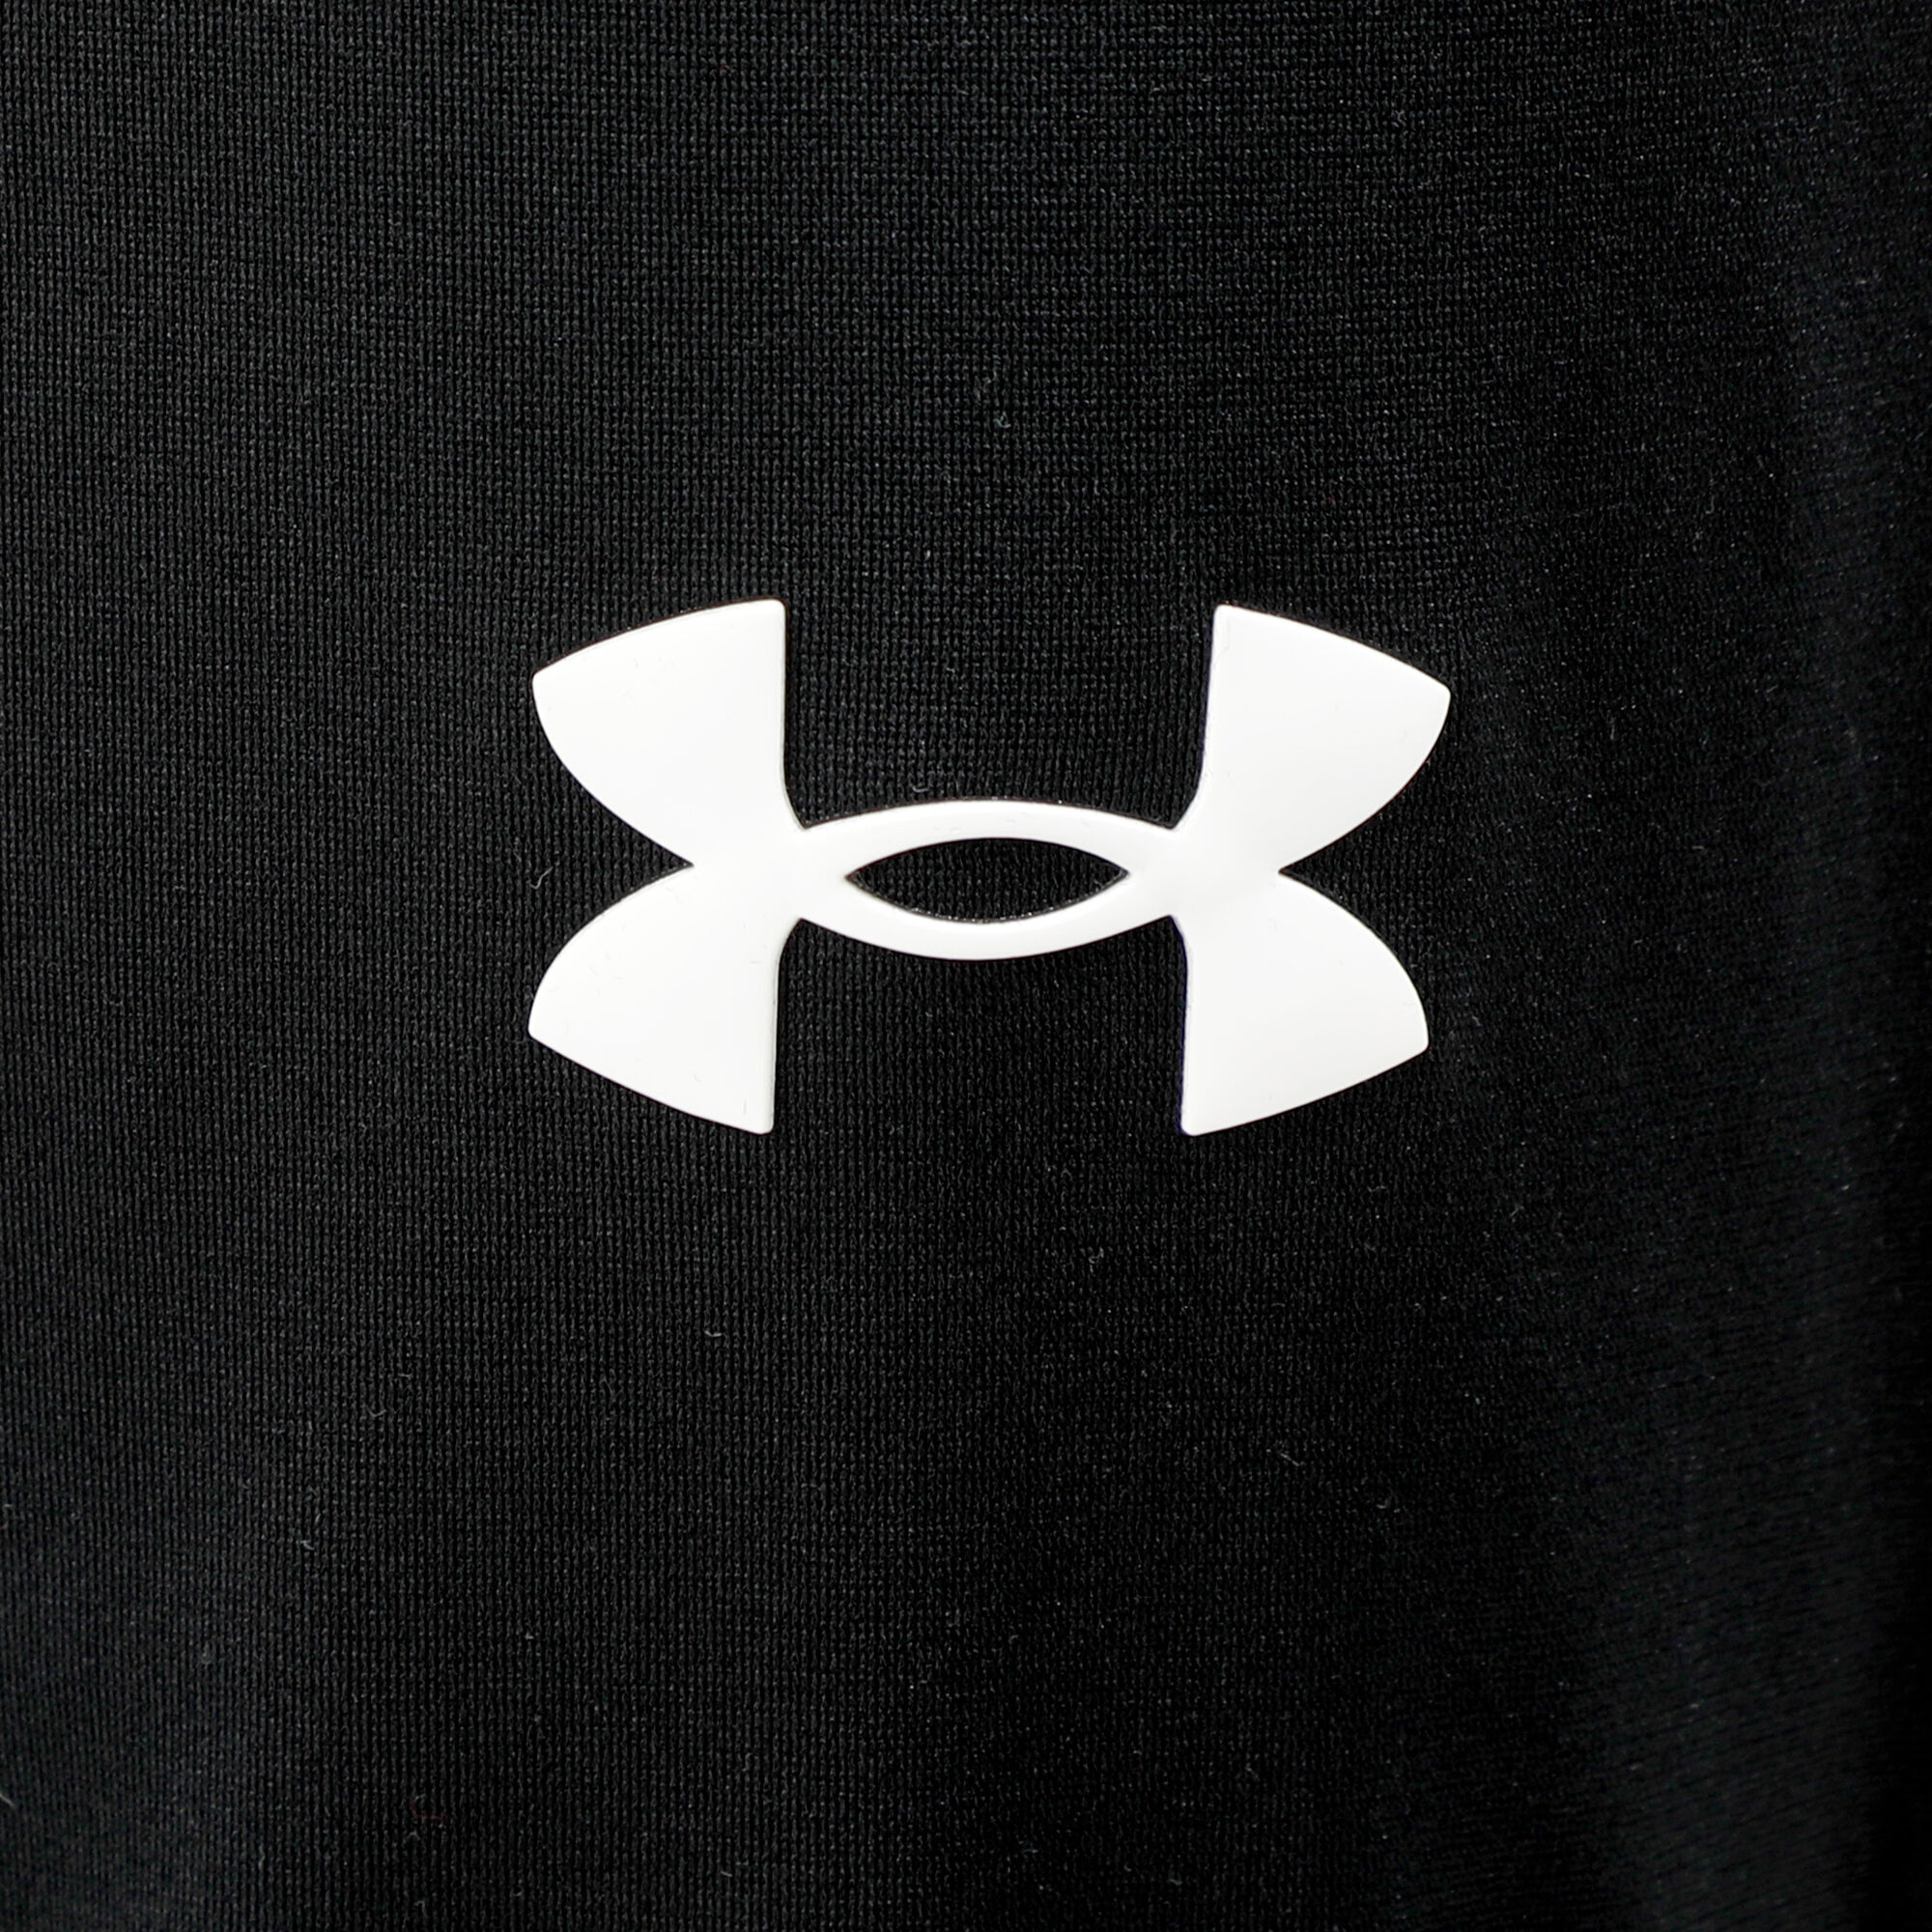 Under Armour Tracksuits and sweat suits for Men, Online Sale up to 20% off